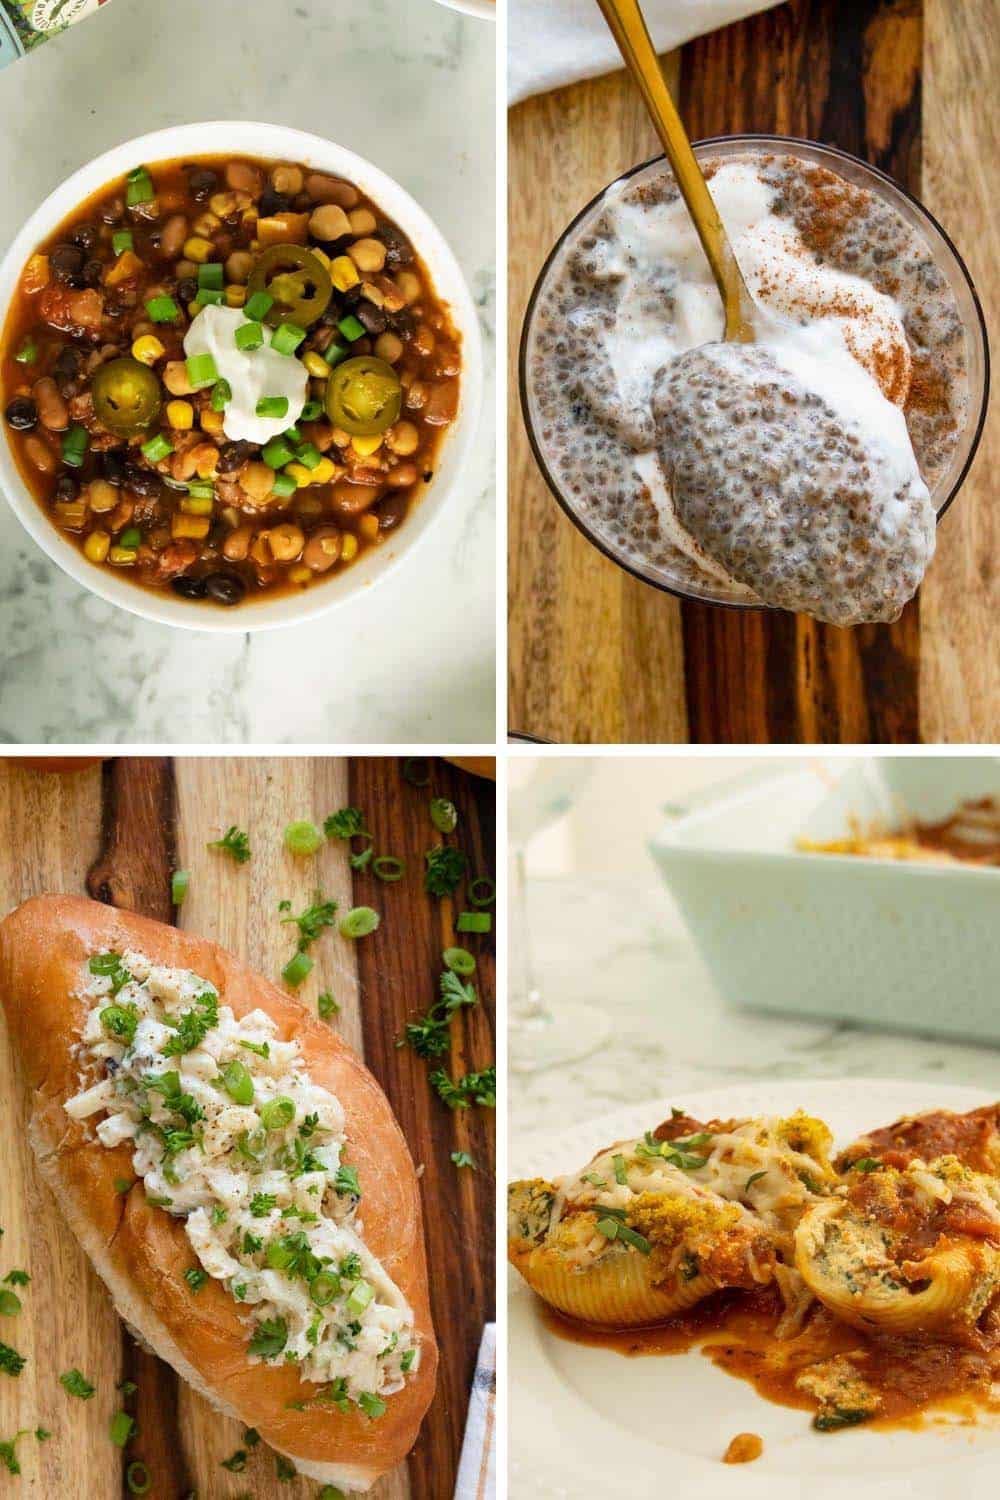 photo collage of vegan pantry meals: chili, chia pudding, vegan lobster roll, stuffed shells